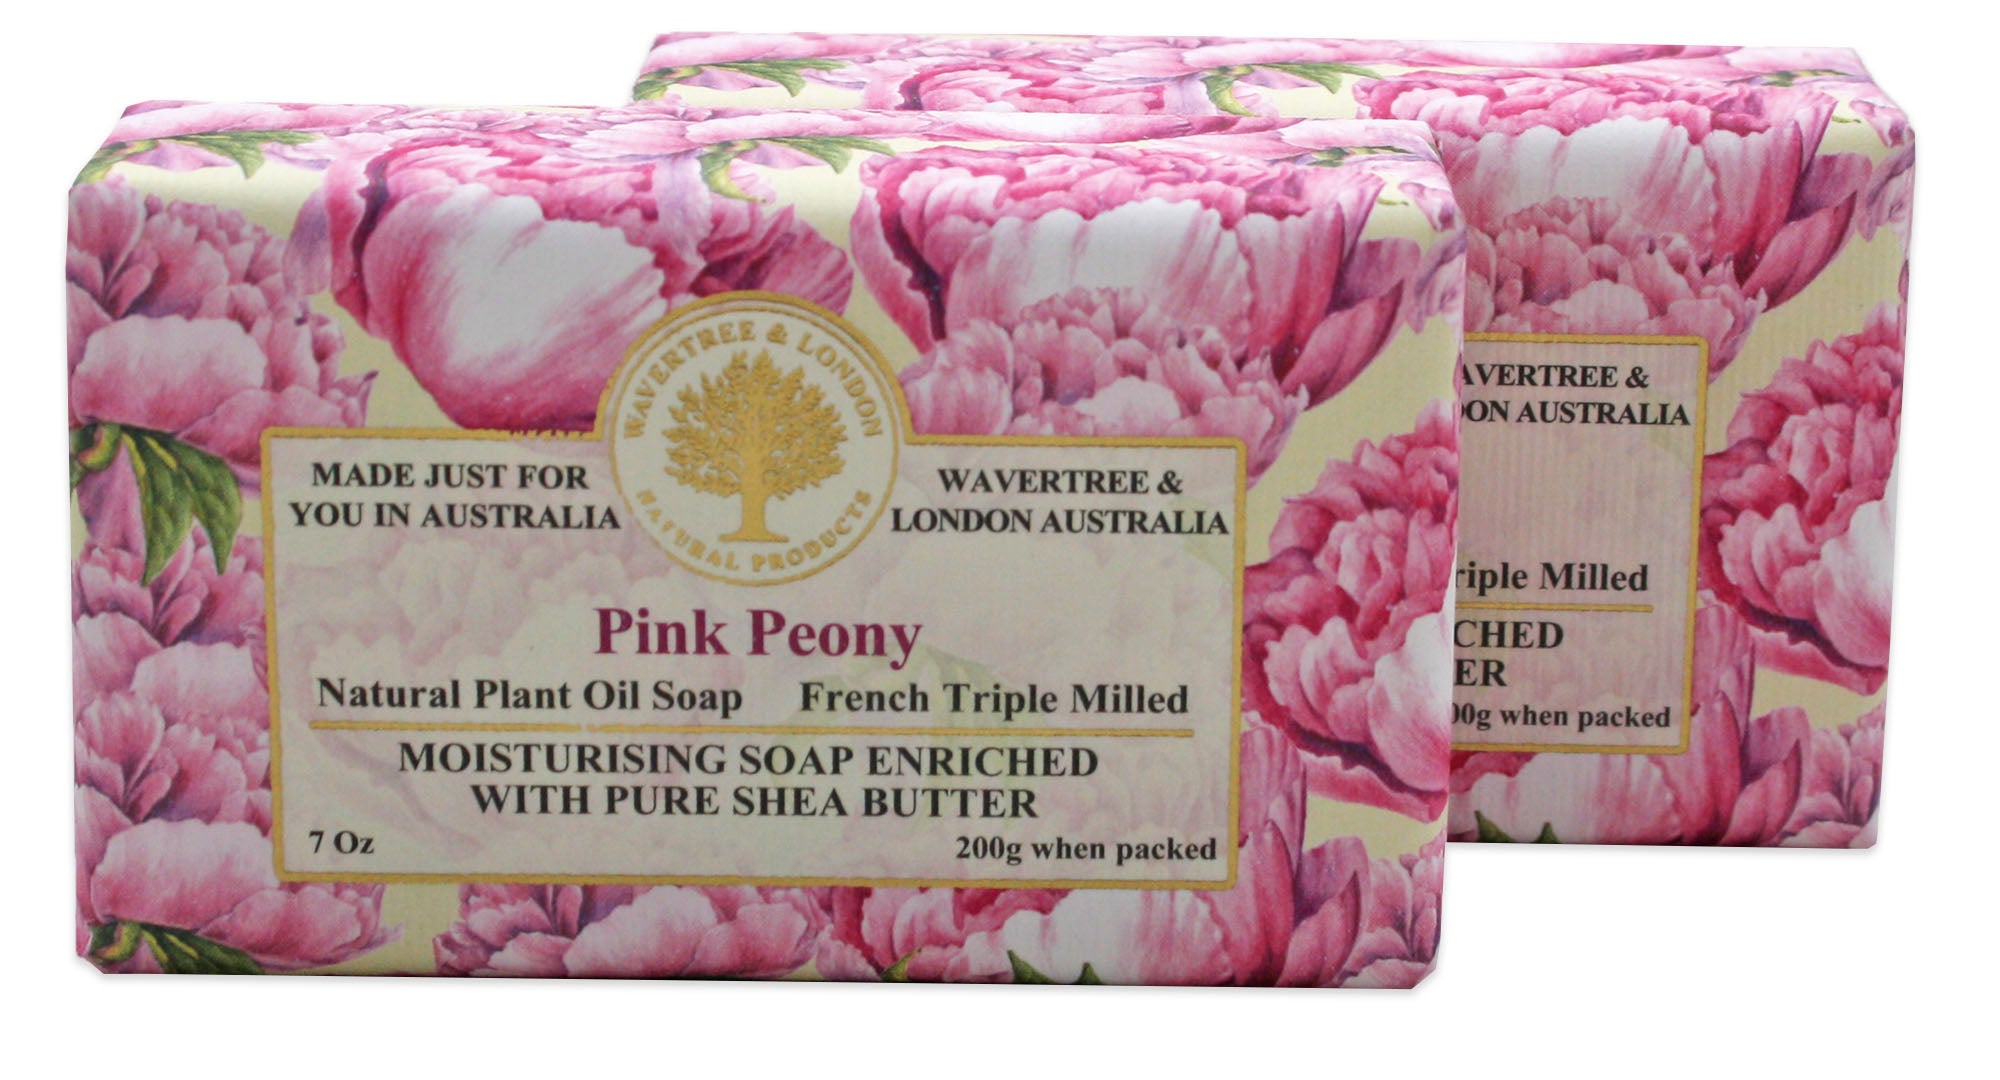 Wavertree & London Pink Peony (2 Bars), 7oz Moisturizing Natural Soap Bar, French -Milled and enriched with Shea Butter